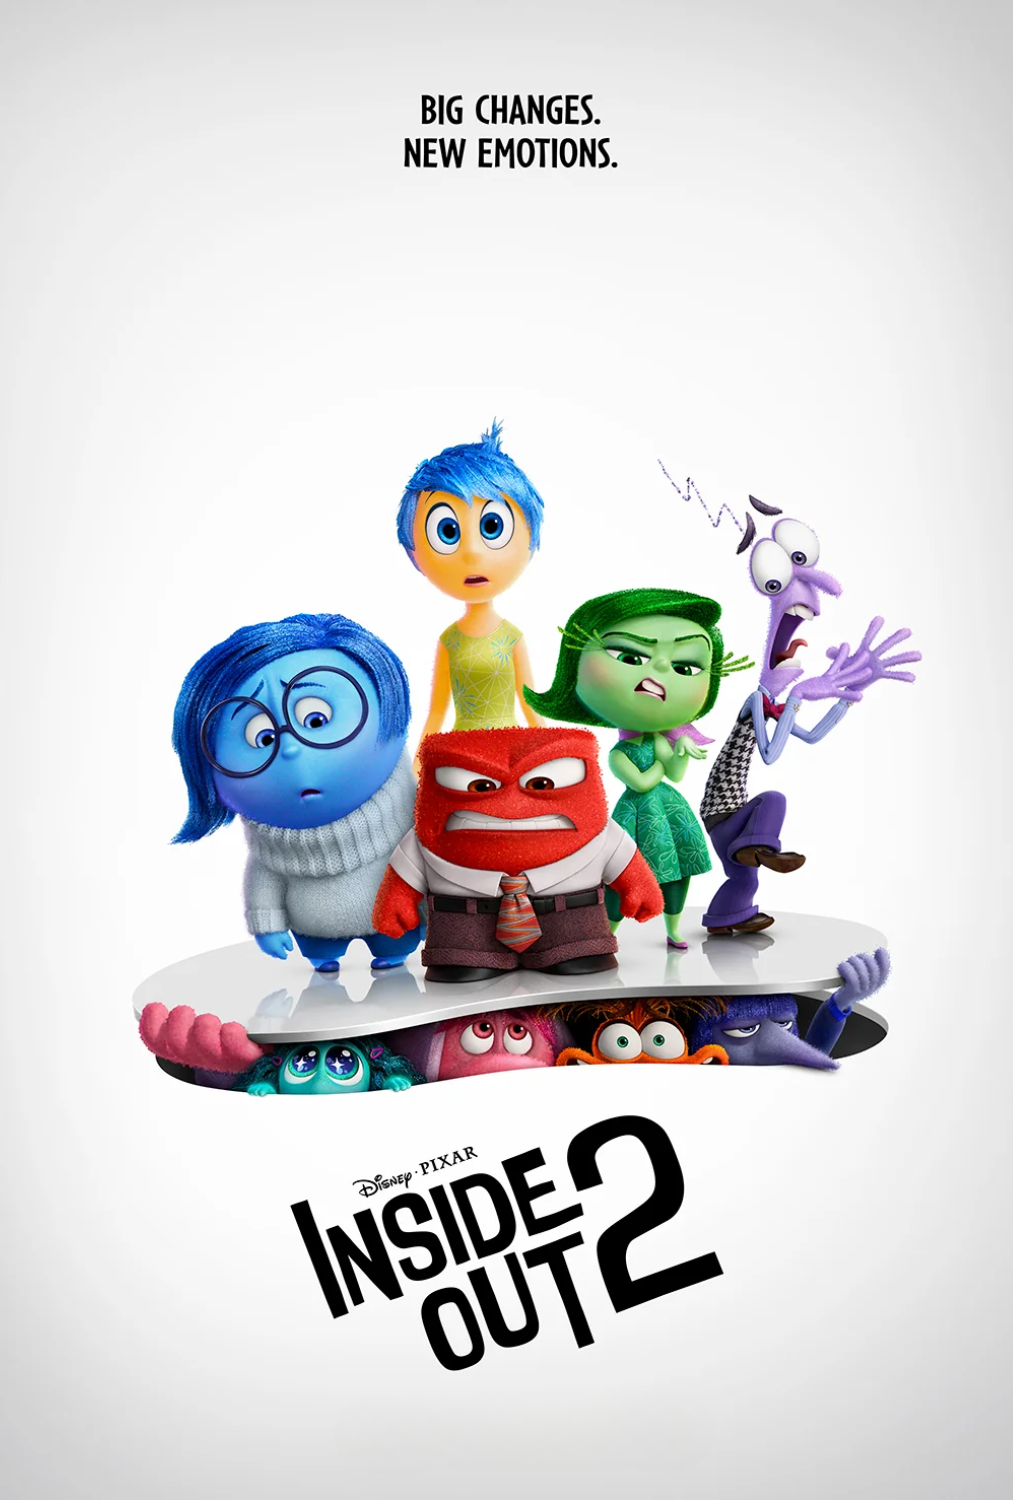 Sieger - Inside Out 2